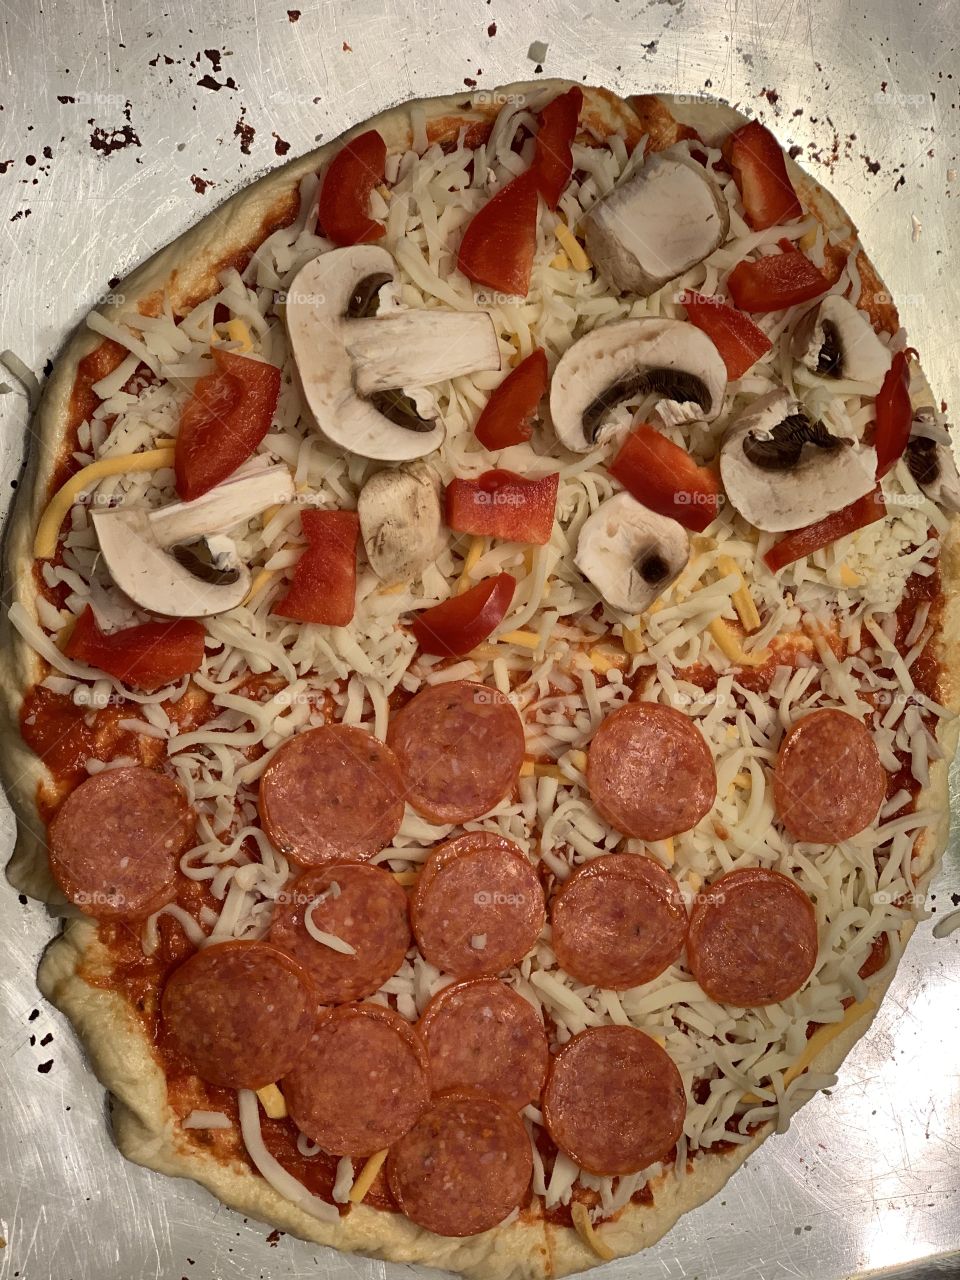 Homemade pizza before going in the oven